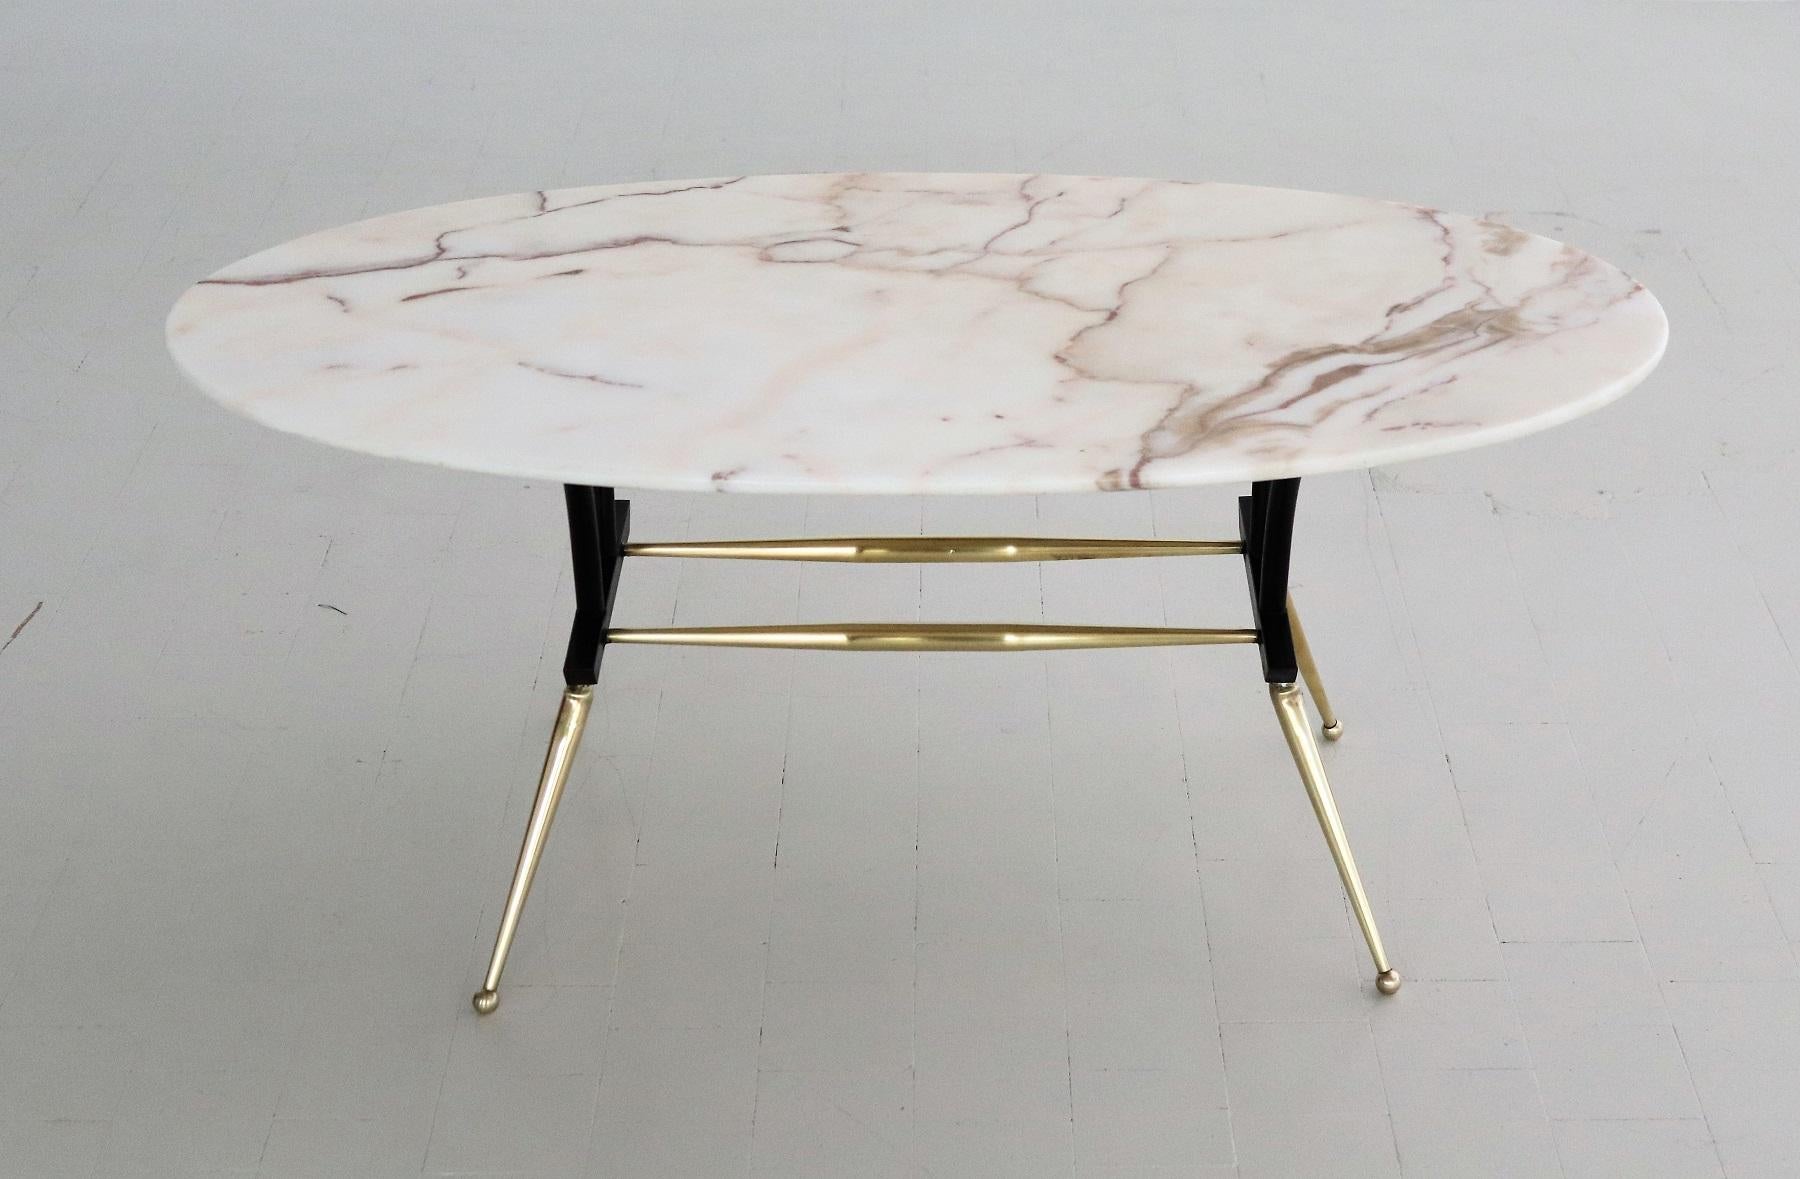 Magnificent oval coffee table with gorgeous elegant light pink and grey marble top and brass / metal legs.
Made in Italy during the 1950s.
The marble is called 